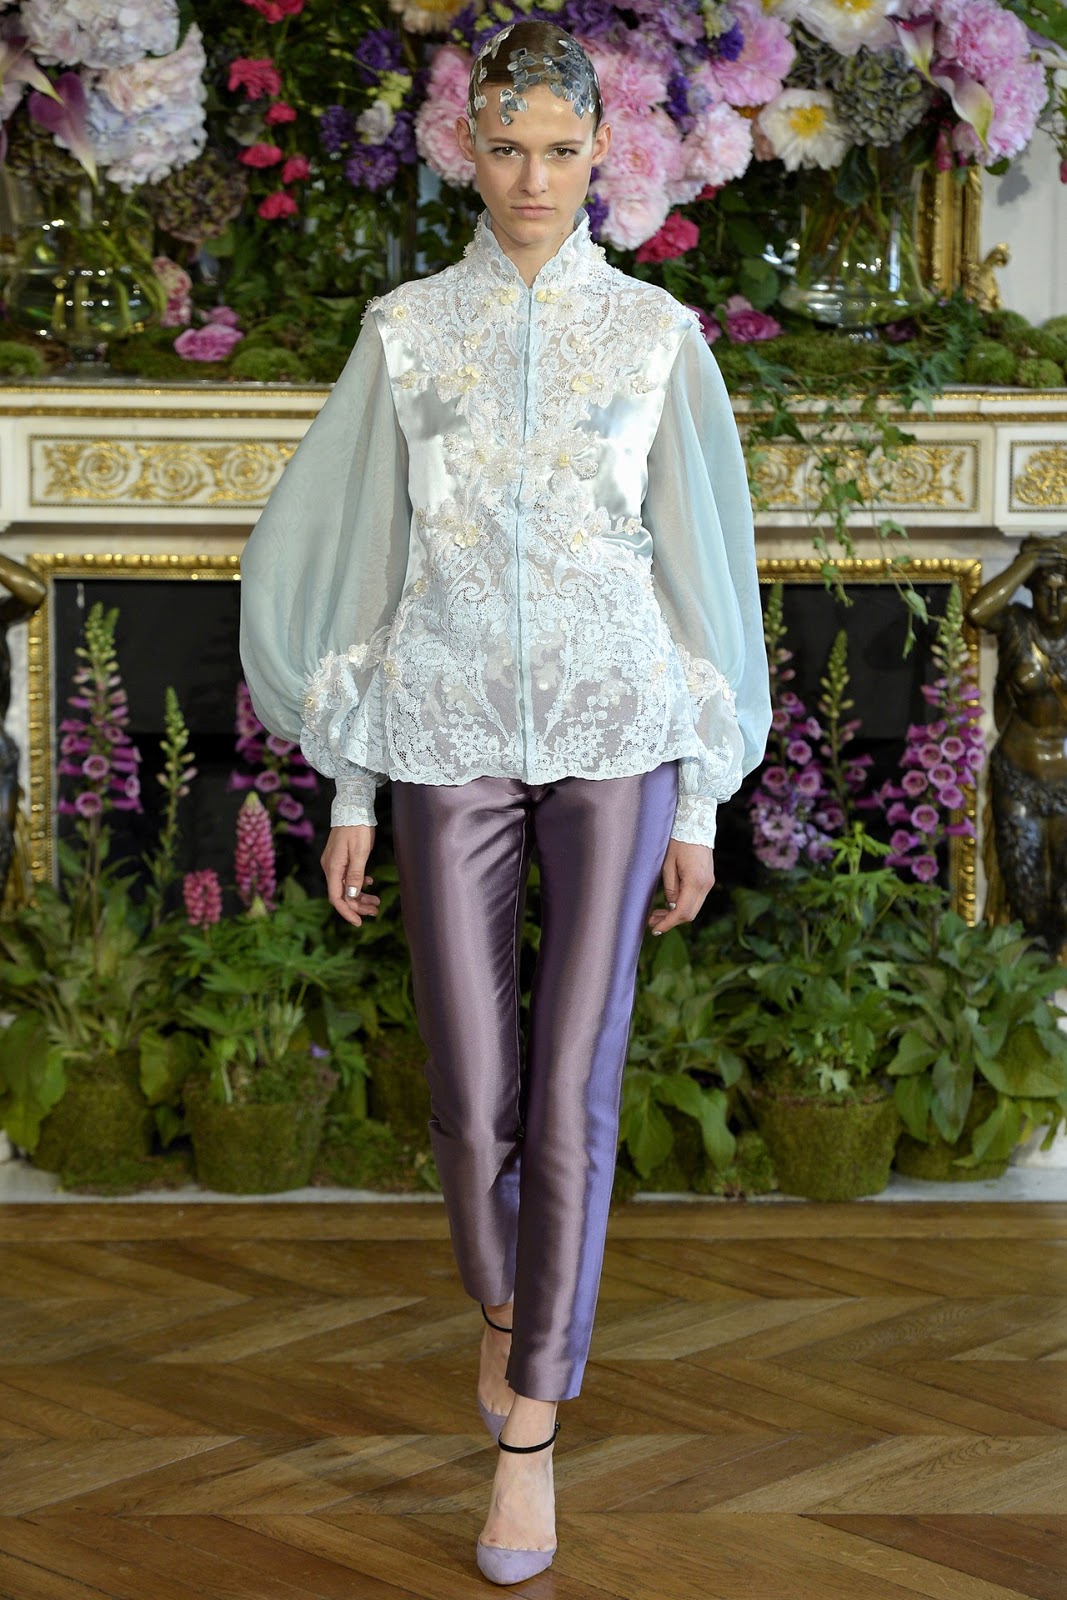 ALEXIS MABILLE AUTUMN/WINTER 2013-14 COUTURE